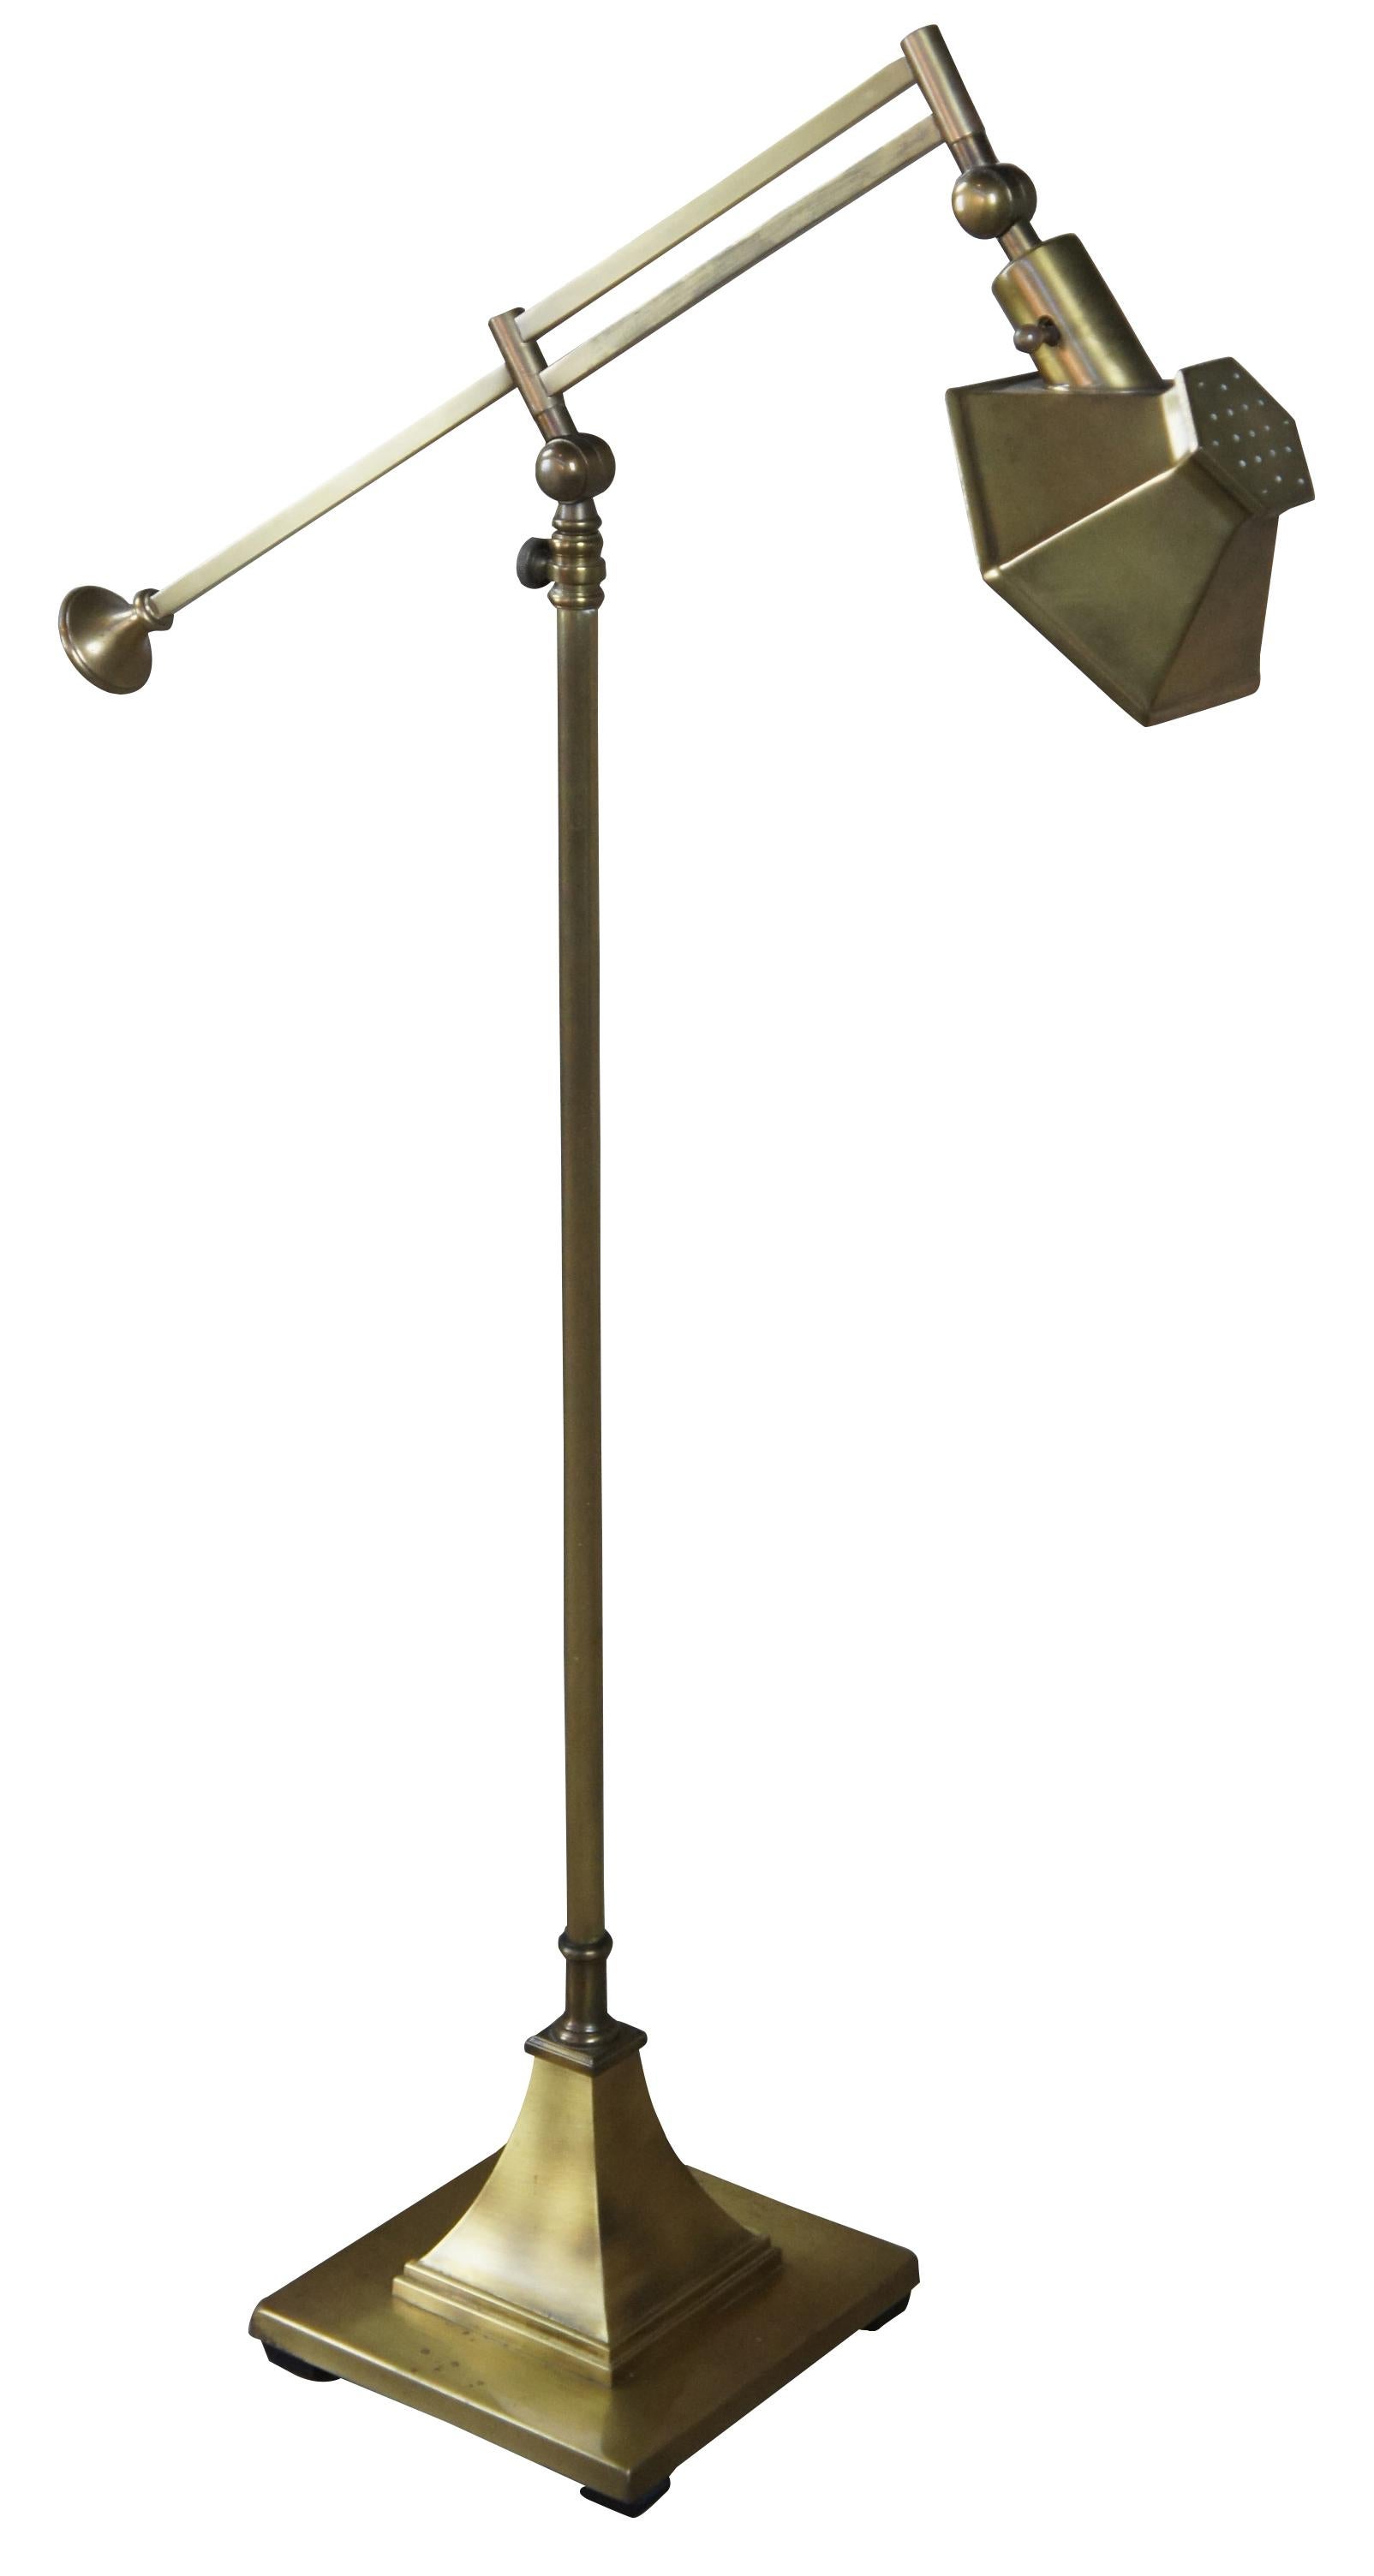 Vintage adjustable brass swing arm floor lamp. Features polished brass and modern styling.

Measures: Height adjustable 43